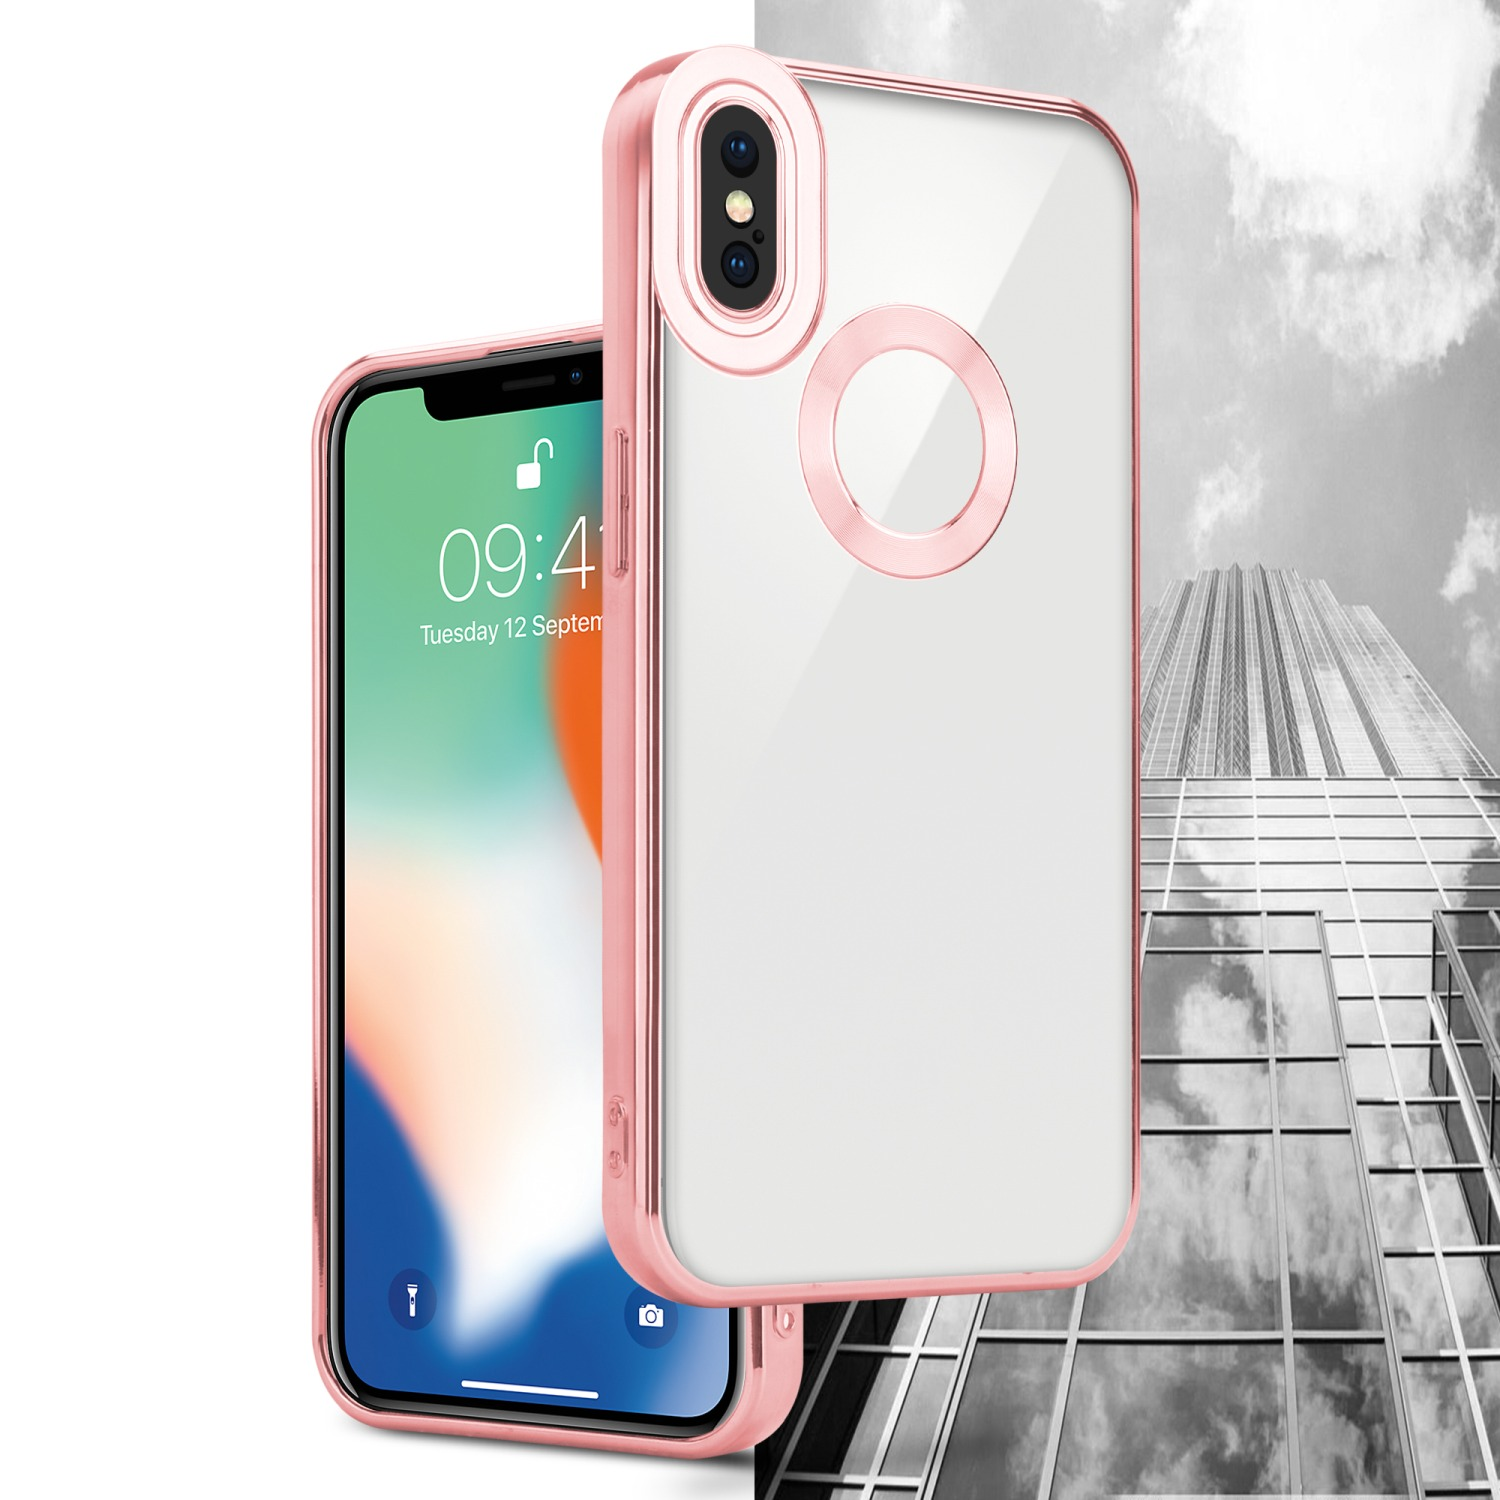 Chrome Handyhülle CADORABO mit Transparent - Applikation, Backcover, Rosa Apple, XS iPhone MAX,